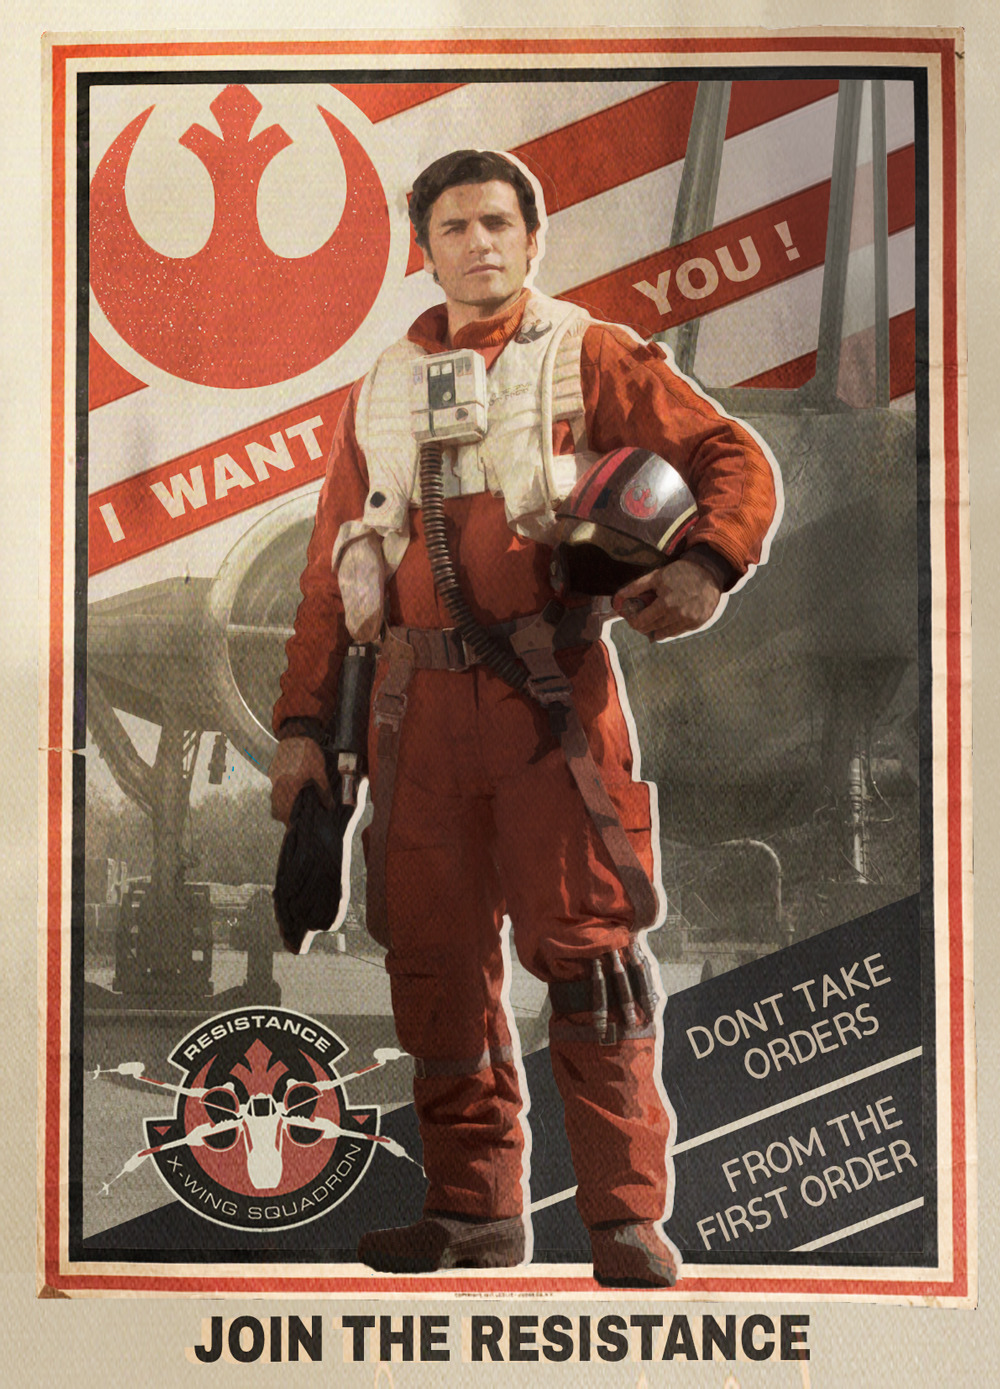 Poe Dameron Recruitment Poster I WANT YOU! Join the Resistance